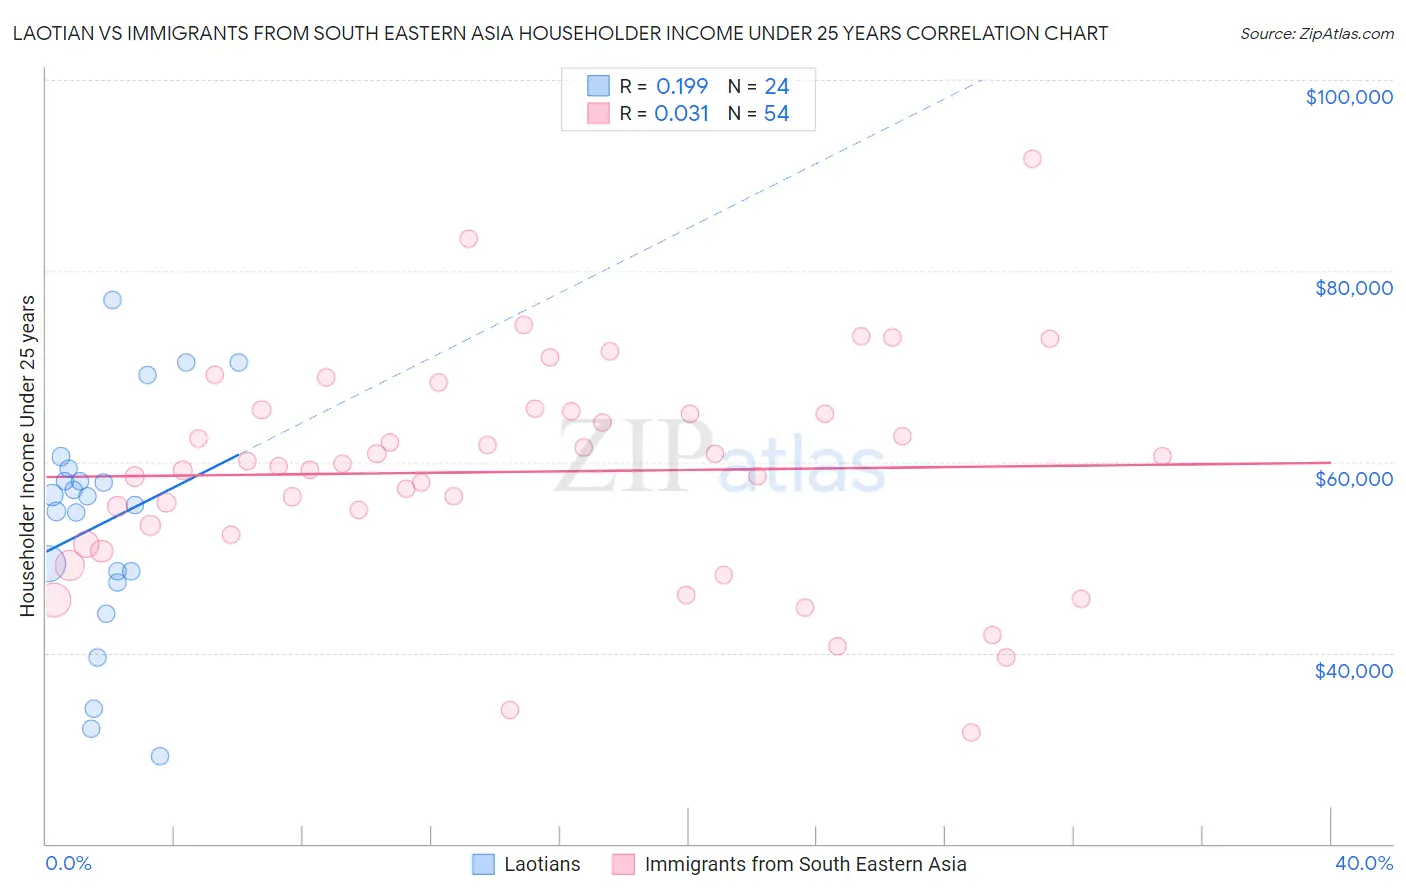 Laotian vs Immigrants from South Eastern Asia Householder Income Under 25 years